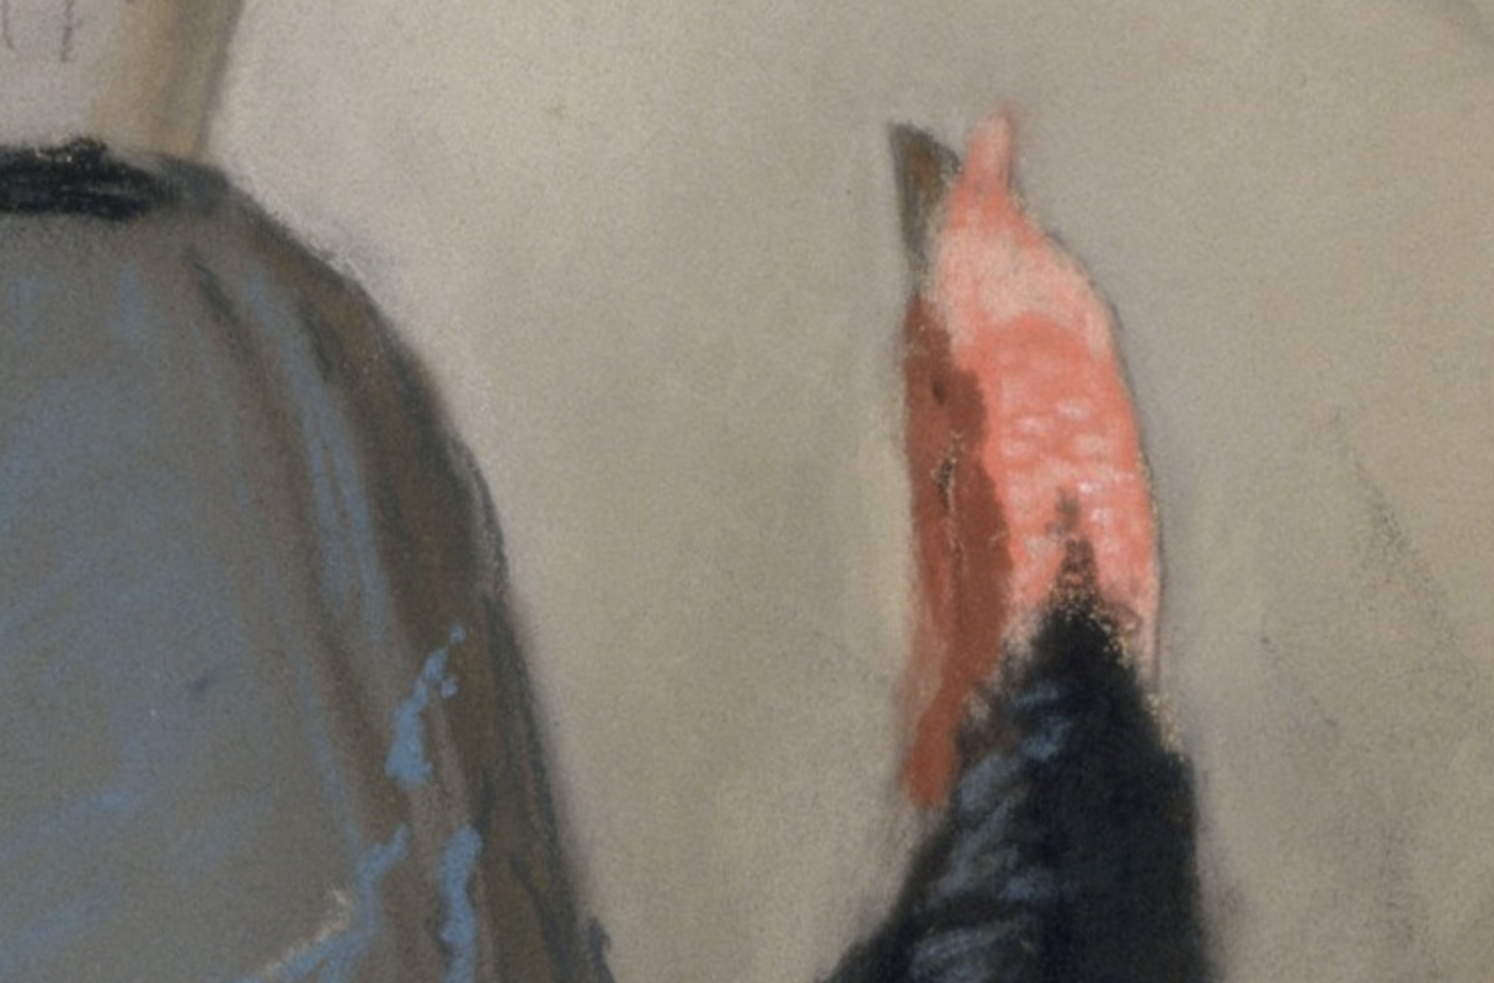 Eastman Johnson, "Feeding the Turkey," ca. 1872-80, pastel on wove paper mounted to canvas on a wooden stretcher, 61 x 35.6 cm (24 x 14 in), Metropolitan Museum of Art, New York, USA - detail of turkey's head